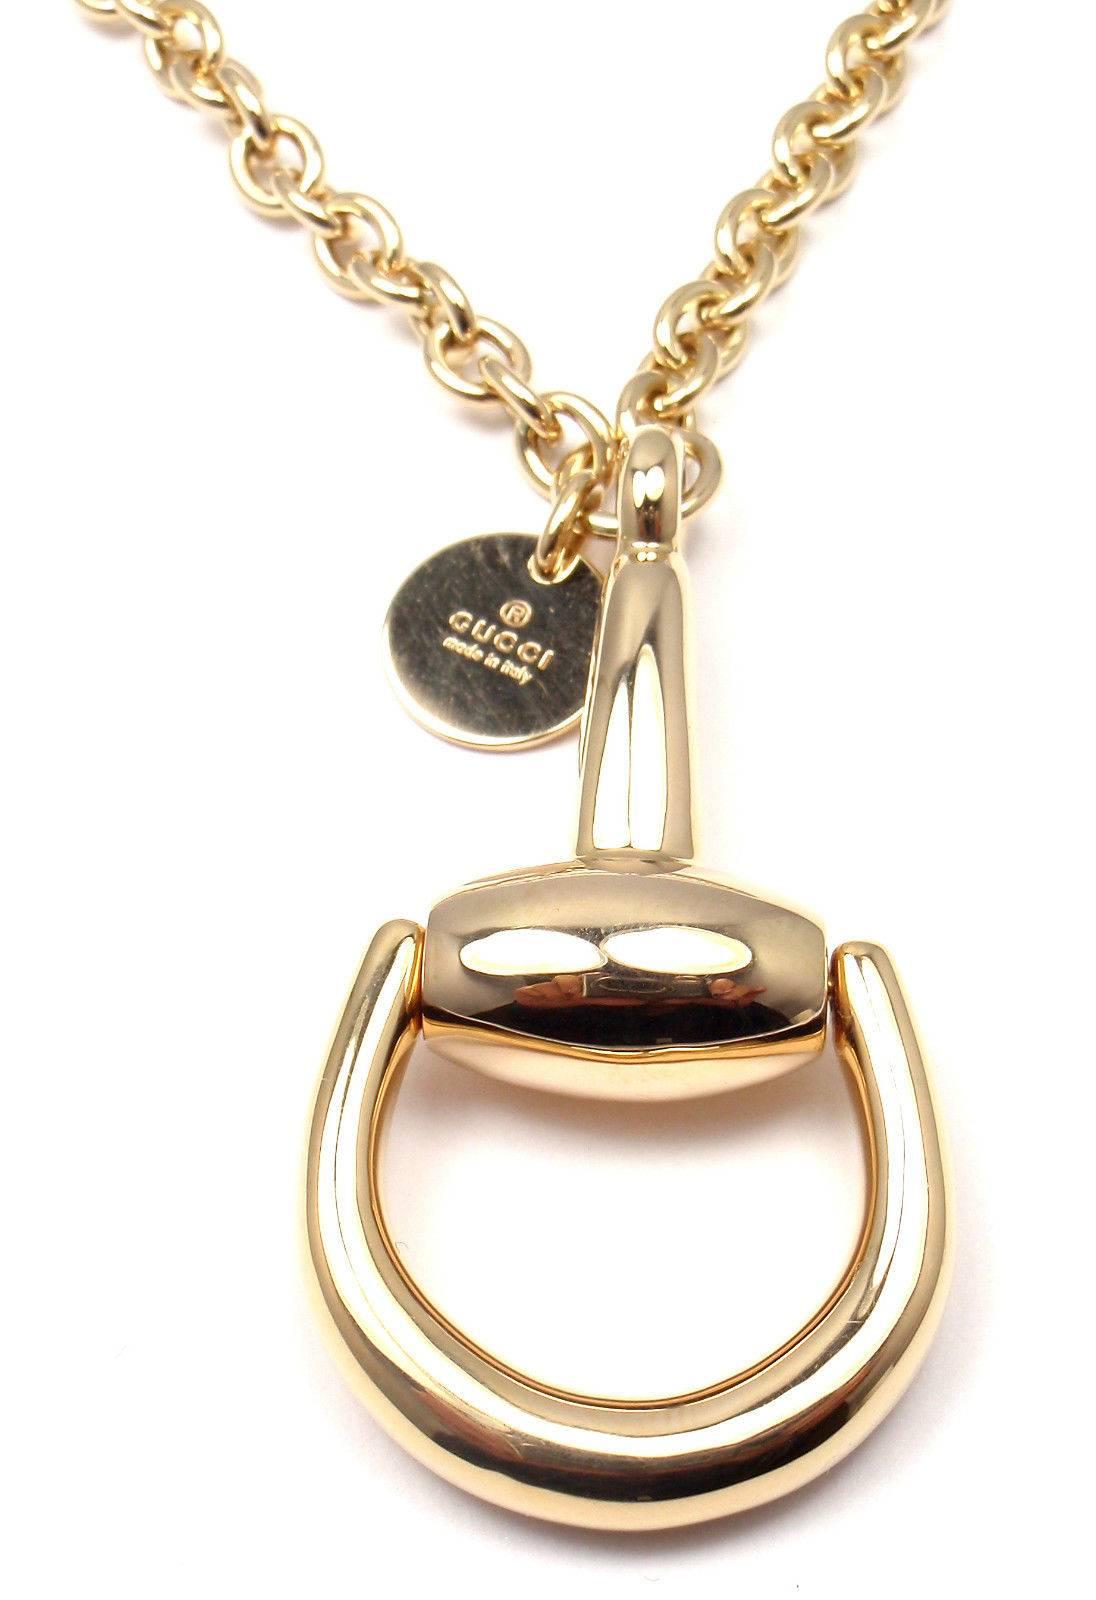 18k yellow gold Horsebit Pendant Link Necklace by Gucci.
This necklace comes with Gucci box.

Details:
Length: 20